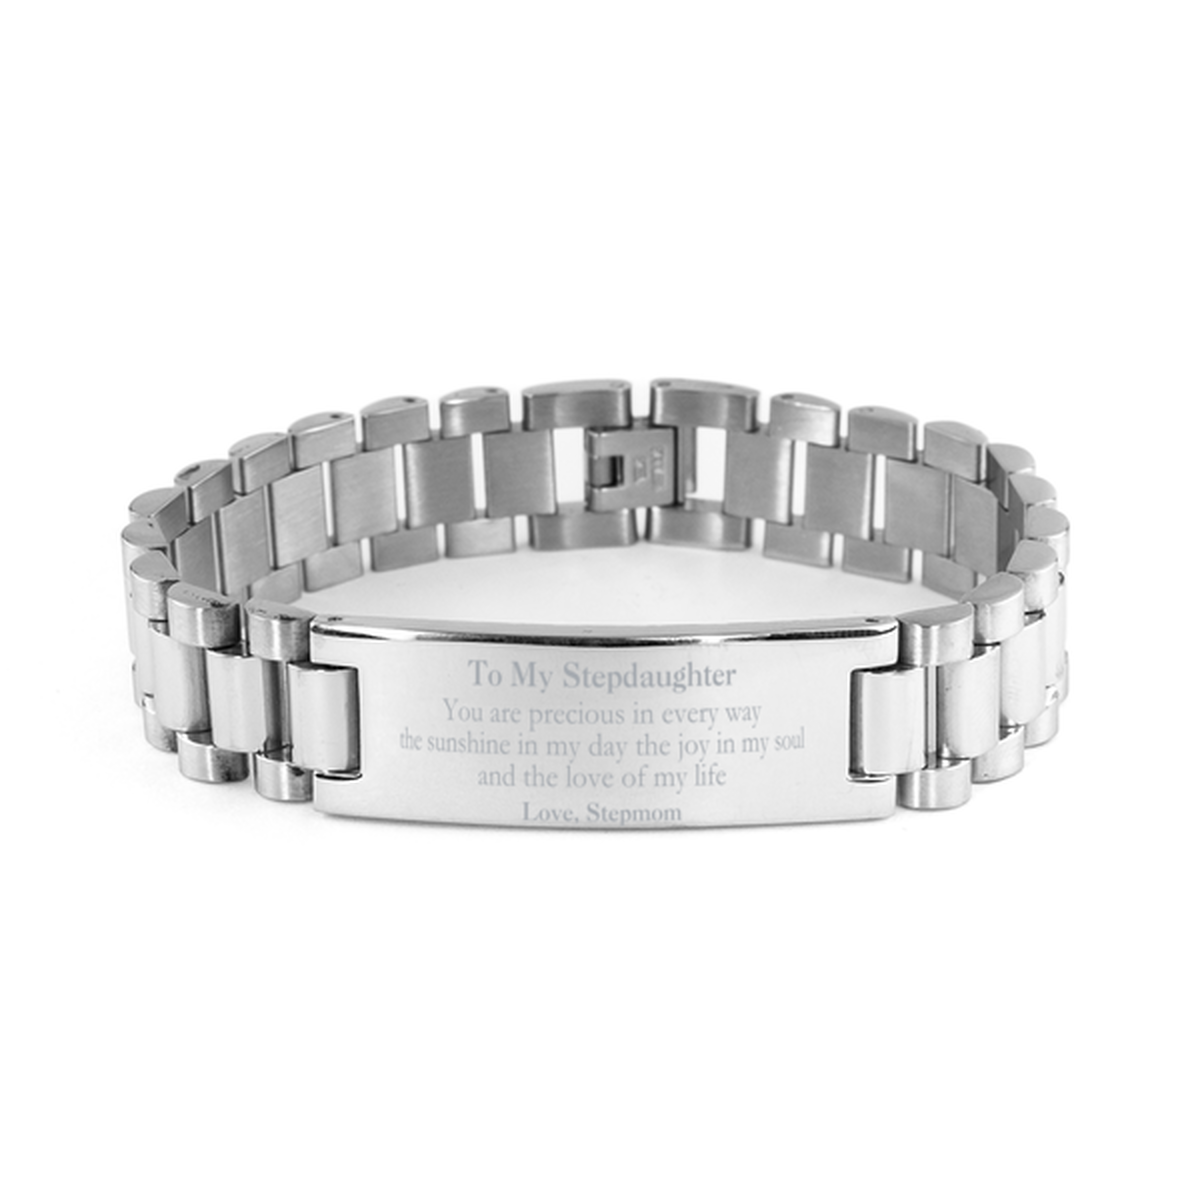 Graduation Gifts for Stepdaughter Ladder Stainless Steel Bracelet Present from Stepmom, Christmas Stepdaughter Birthday Gifts Stepdaughter You are precious in every way the sunshine in my day. Love, Stepmom